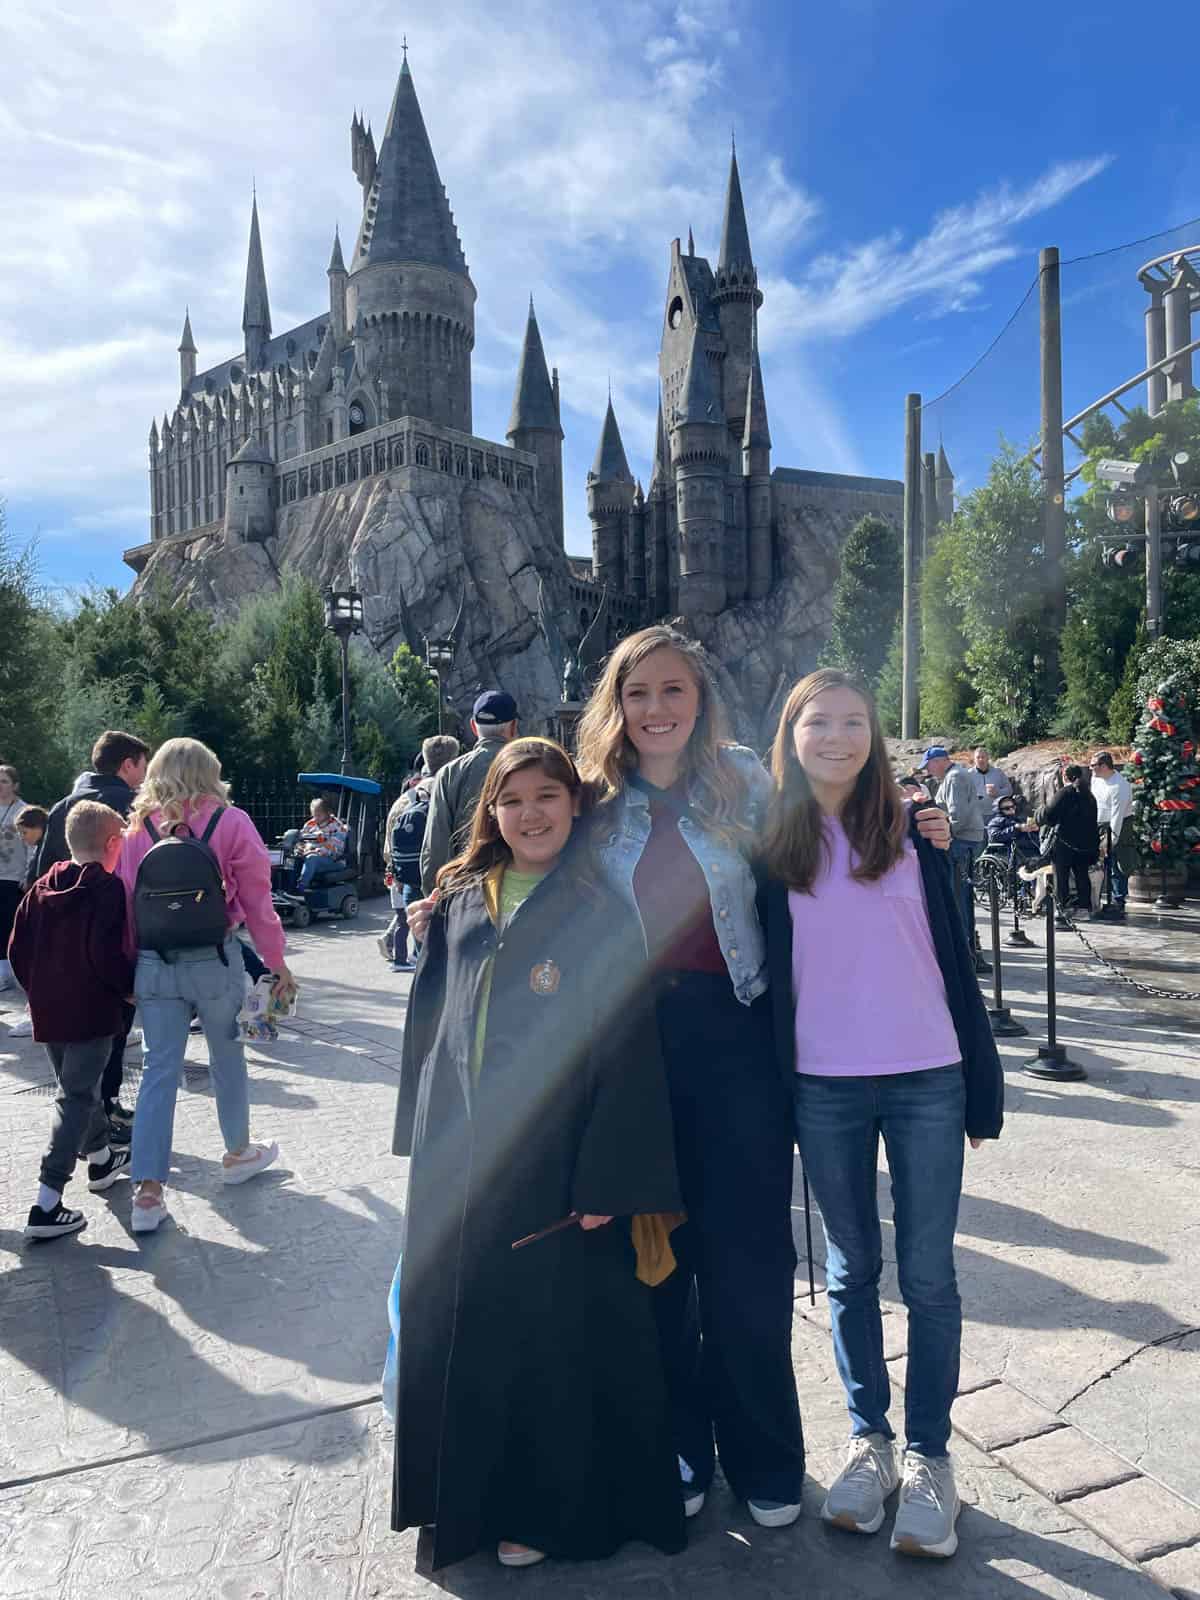 An image of a mother and daughters in front of the Hogwarts castle in Harry Potter World.